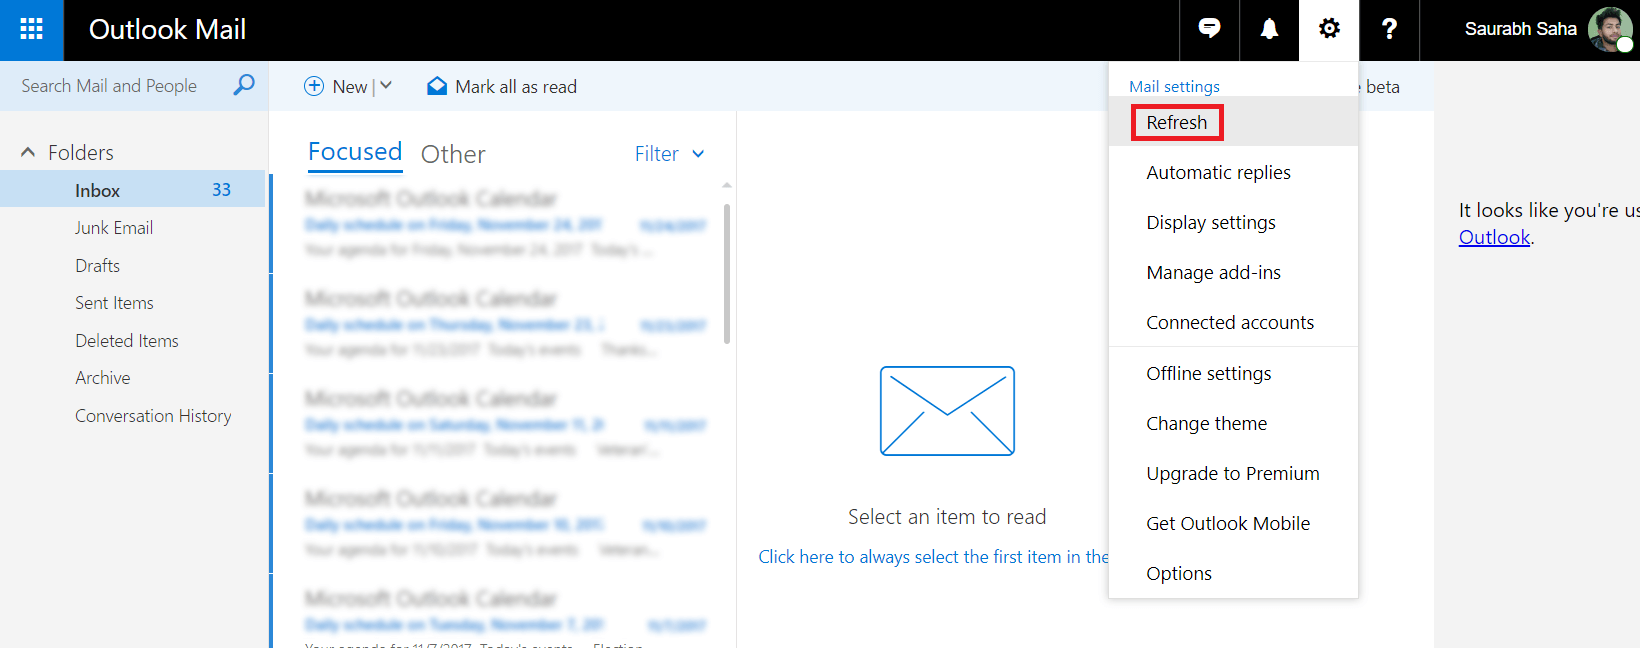 windows 10 email app refres all inboxes